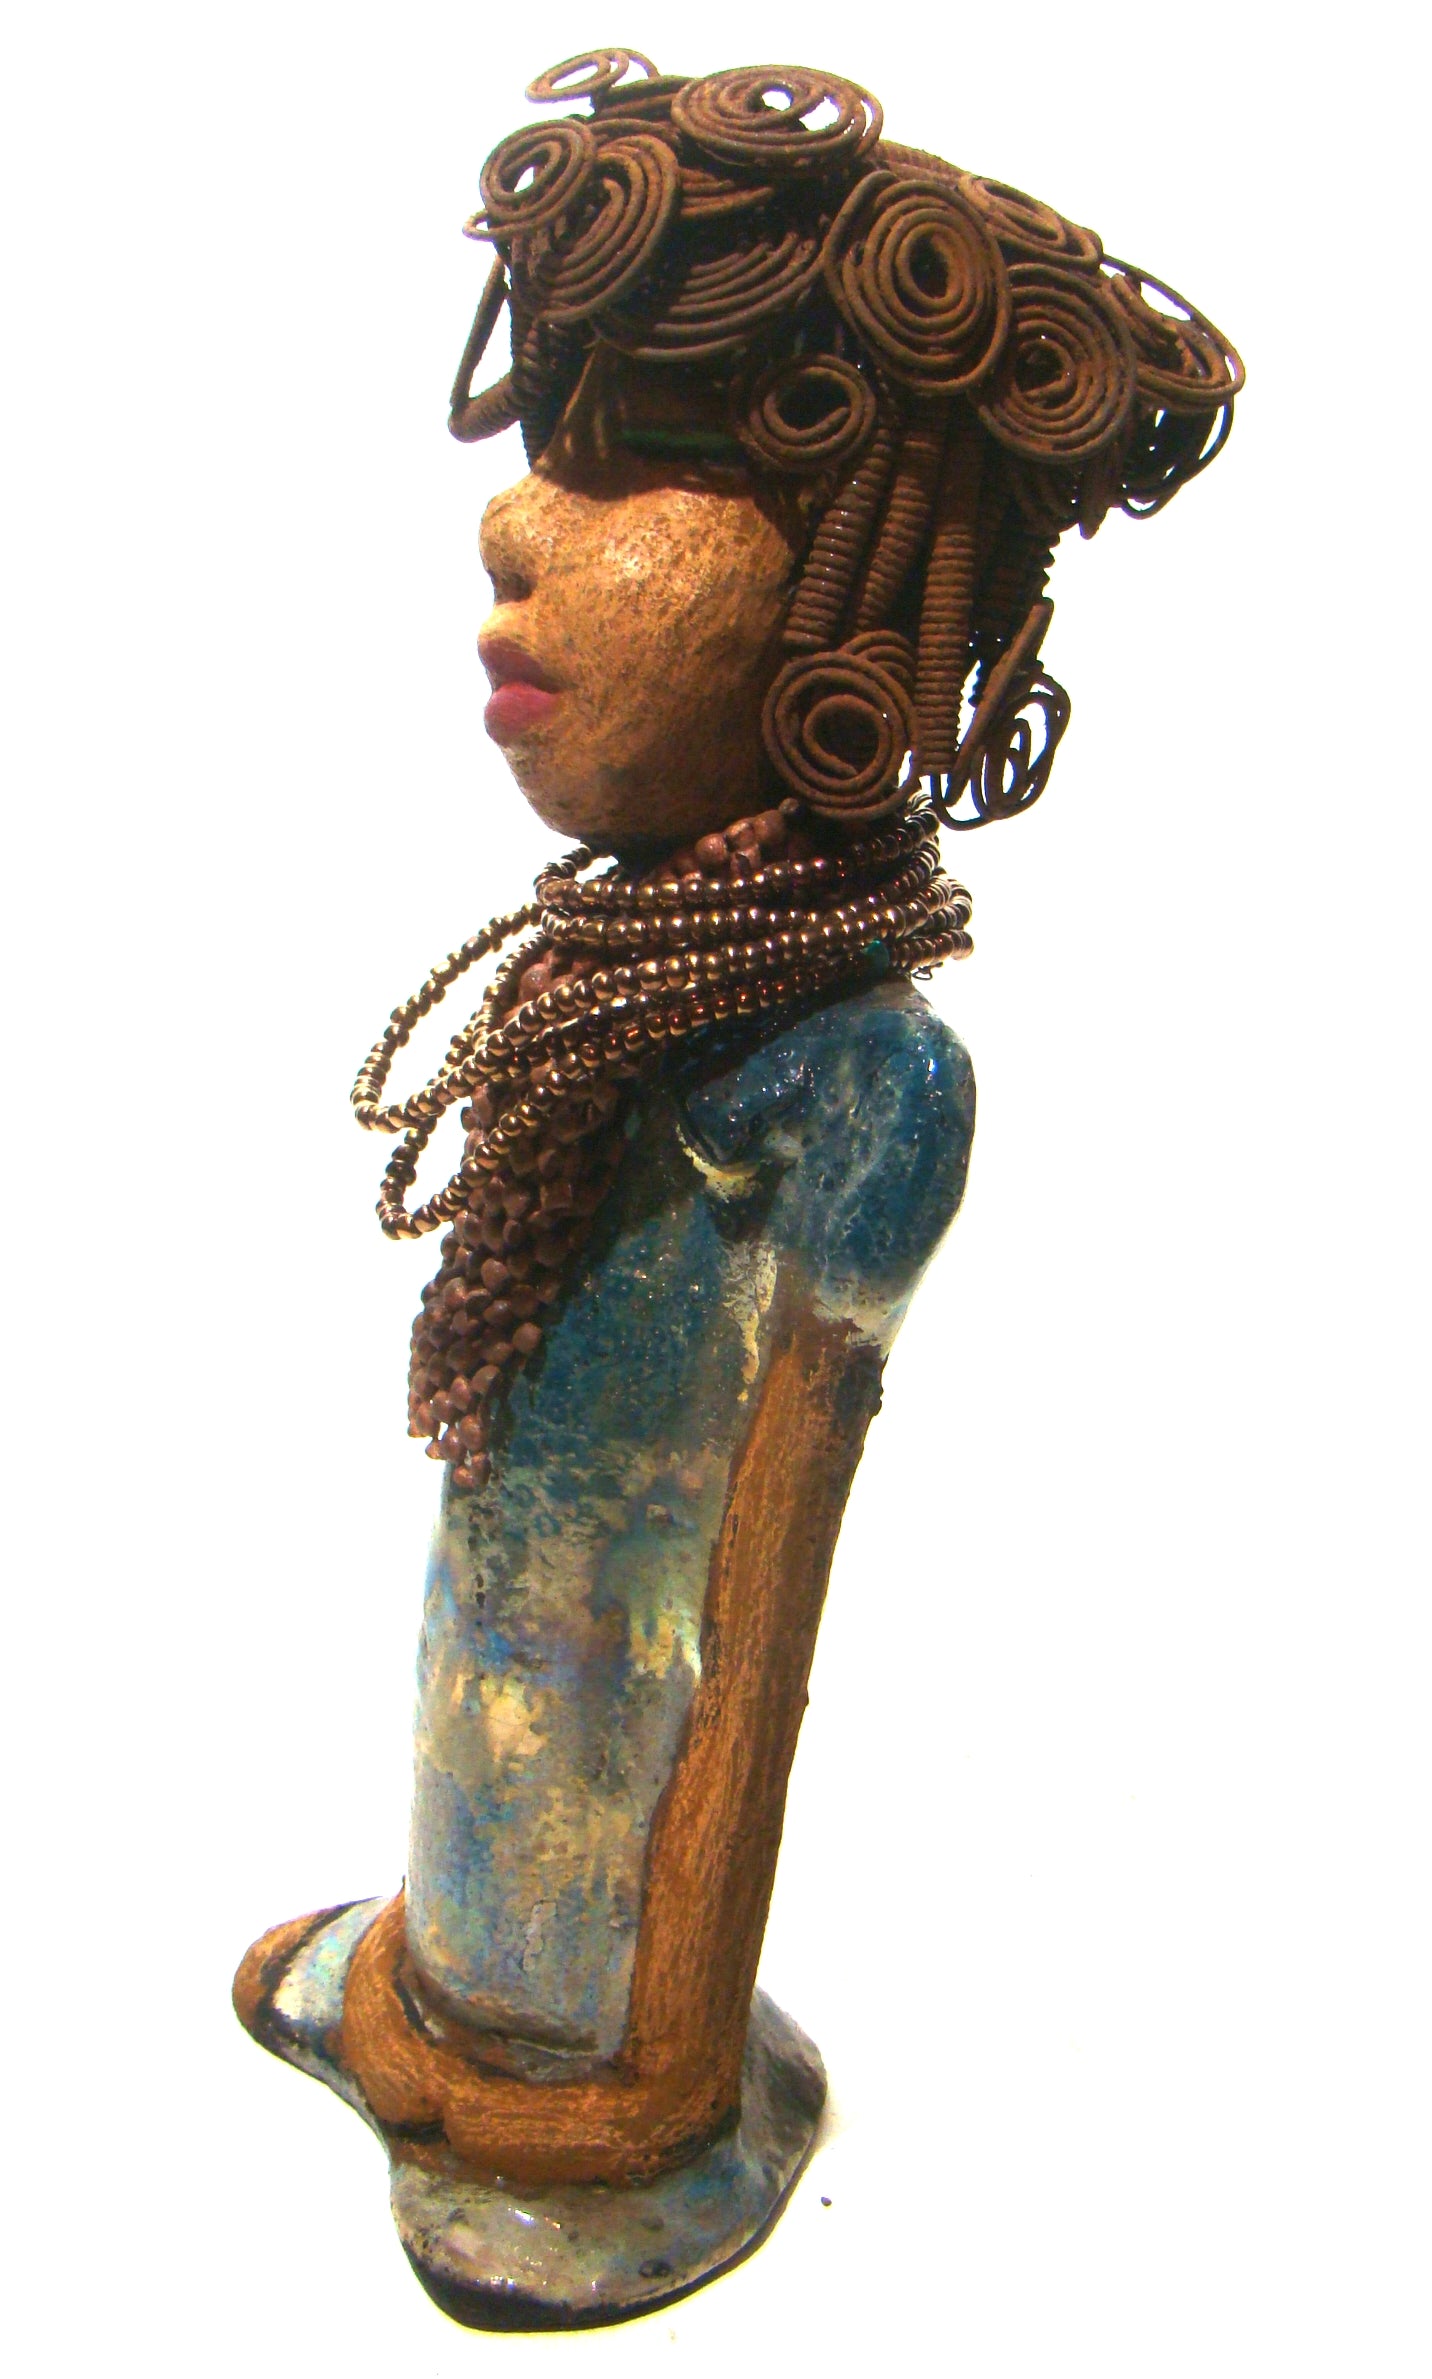      Sherri stands 13' x 4" x 2.5" and weighs 3.05 lbs.     She has over 25 feet of wire curls and coils.     Sherri has a sweet honey brown complexion.     Her dress is a metallic multi colored green with an amber beaded necklace and scarf.     Sherri has the familiar long loving arms at her side.